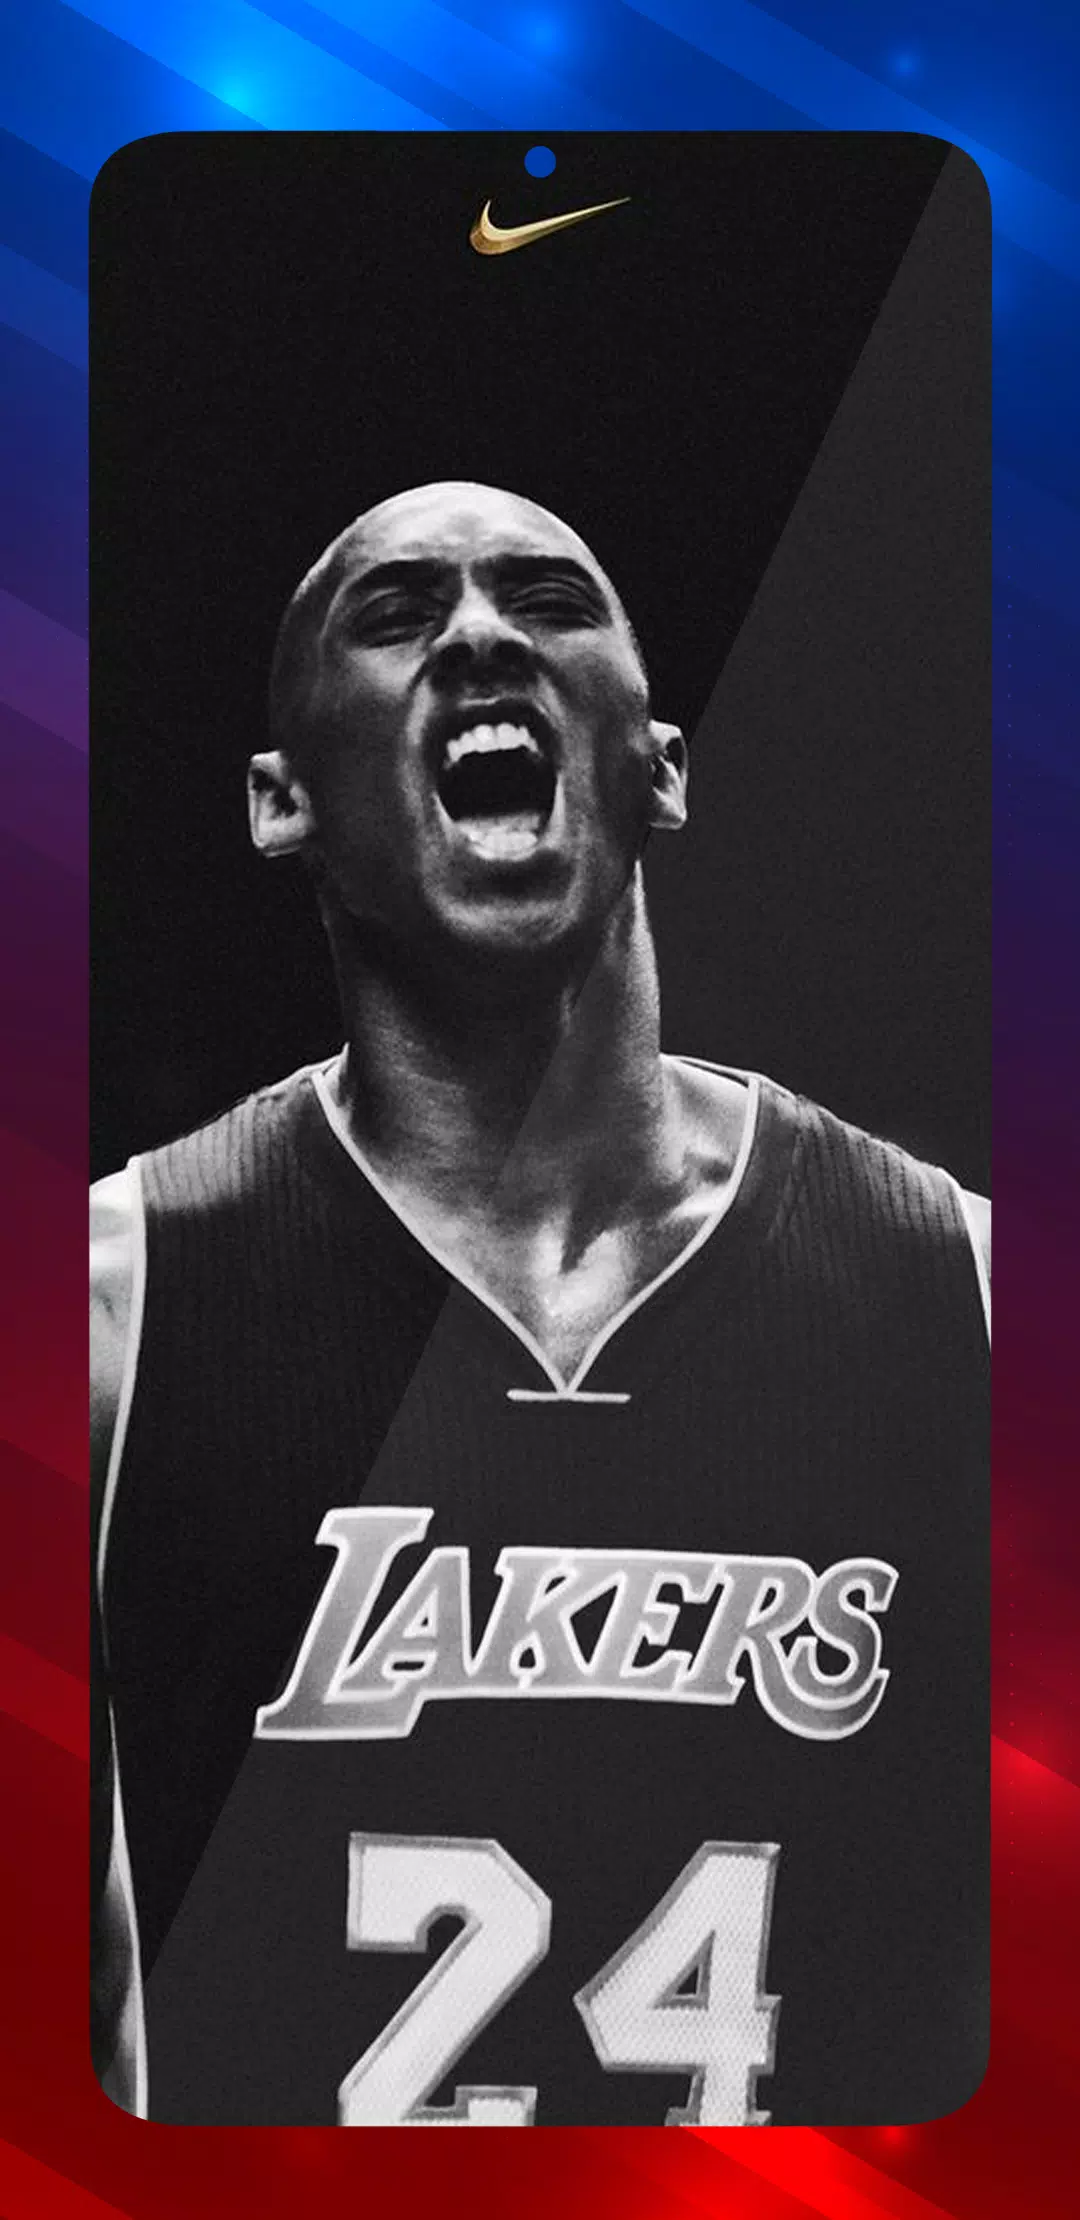 NBA Wallpapers HD - APK Download for Android